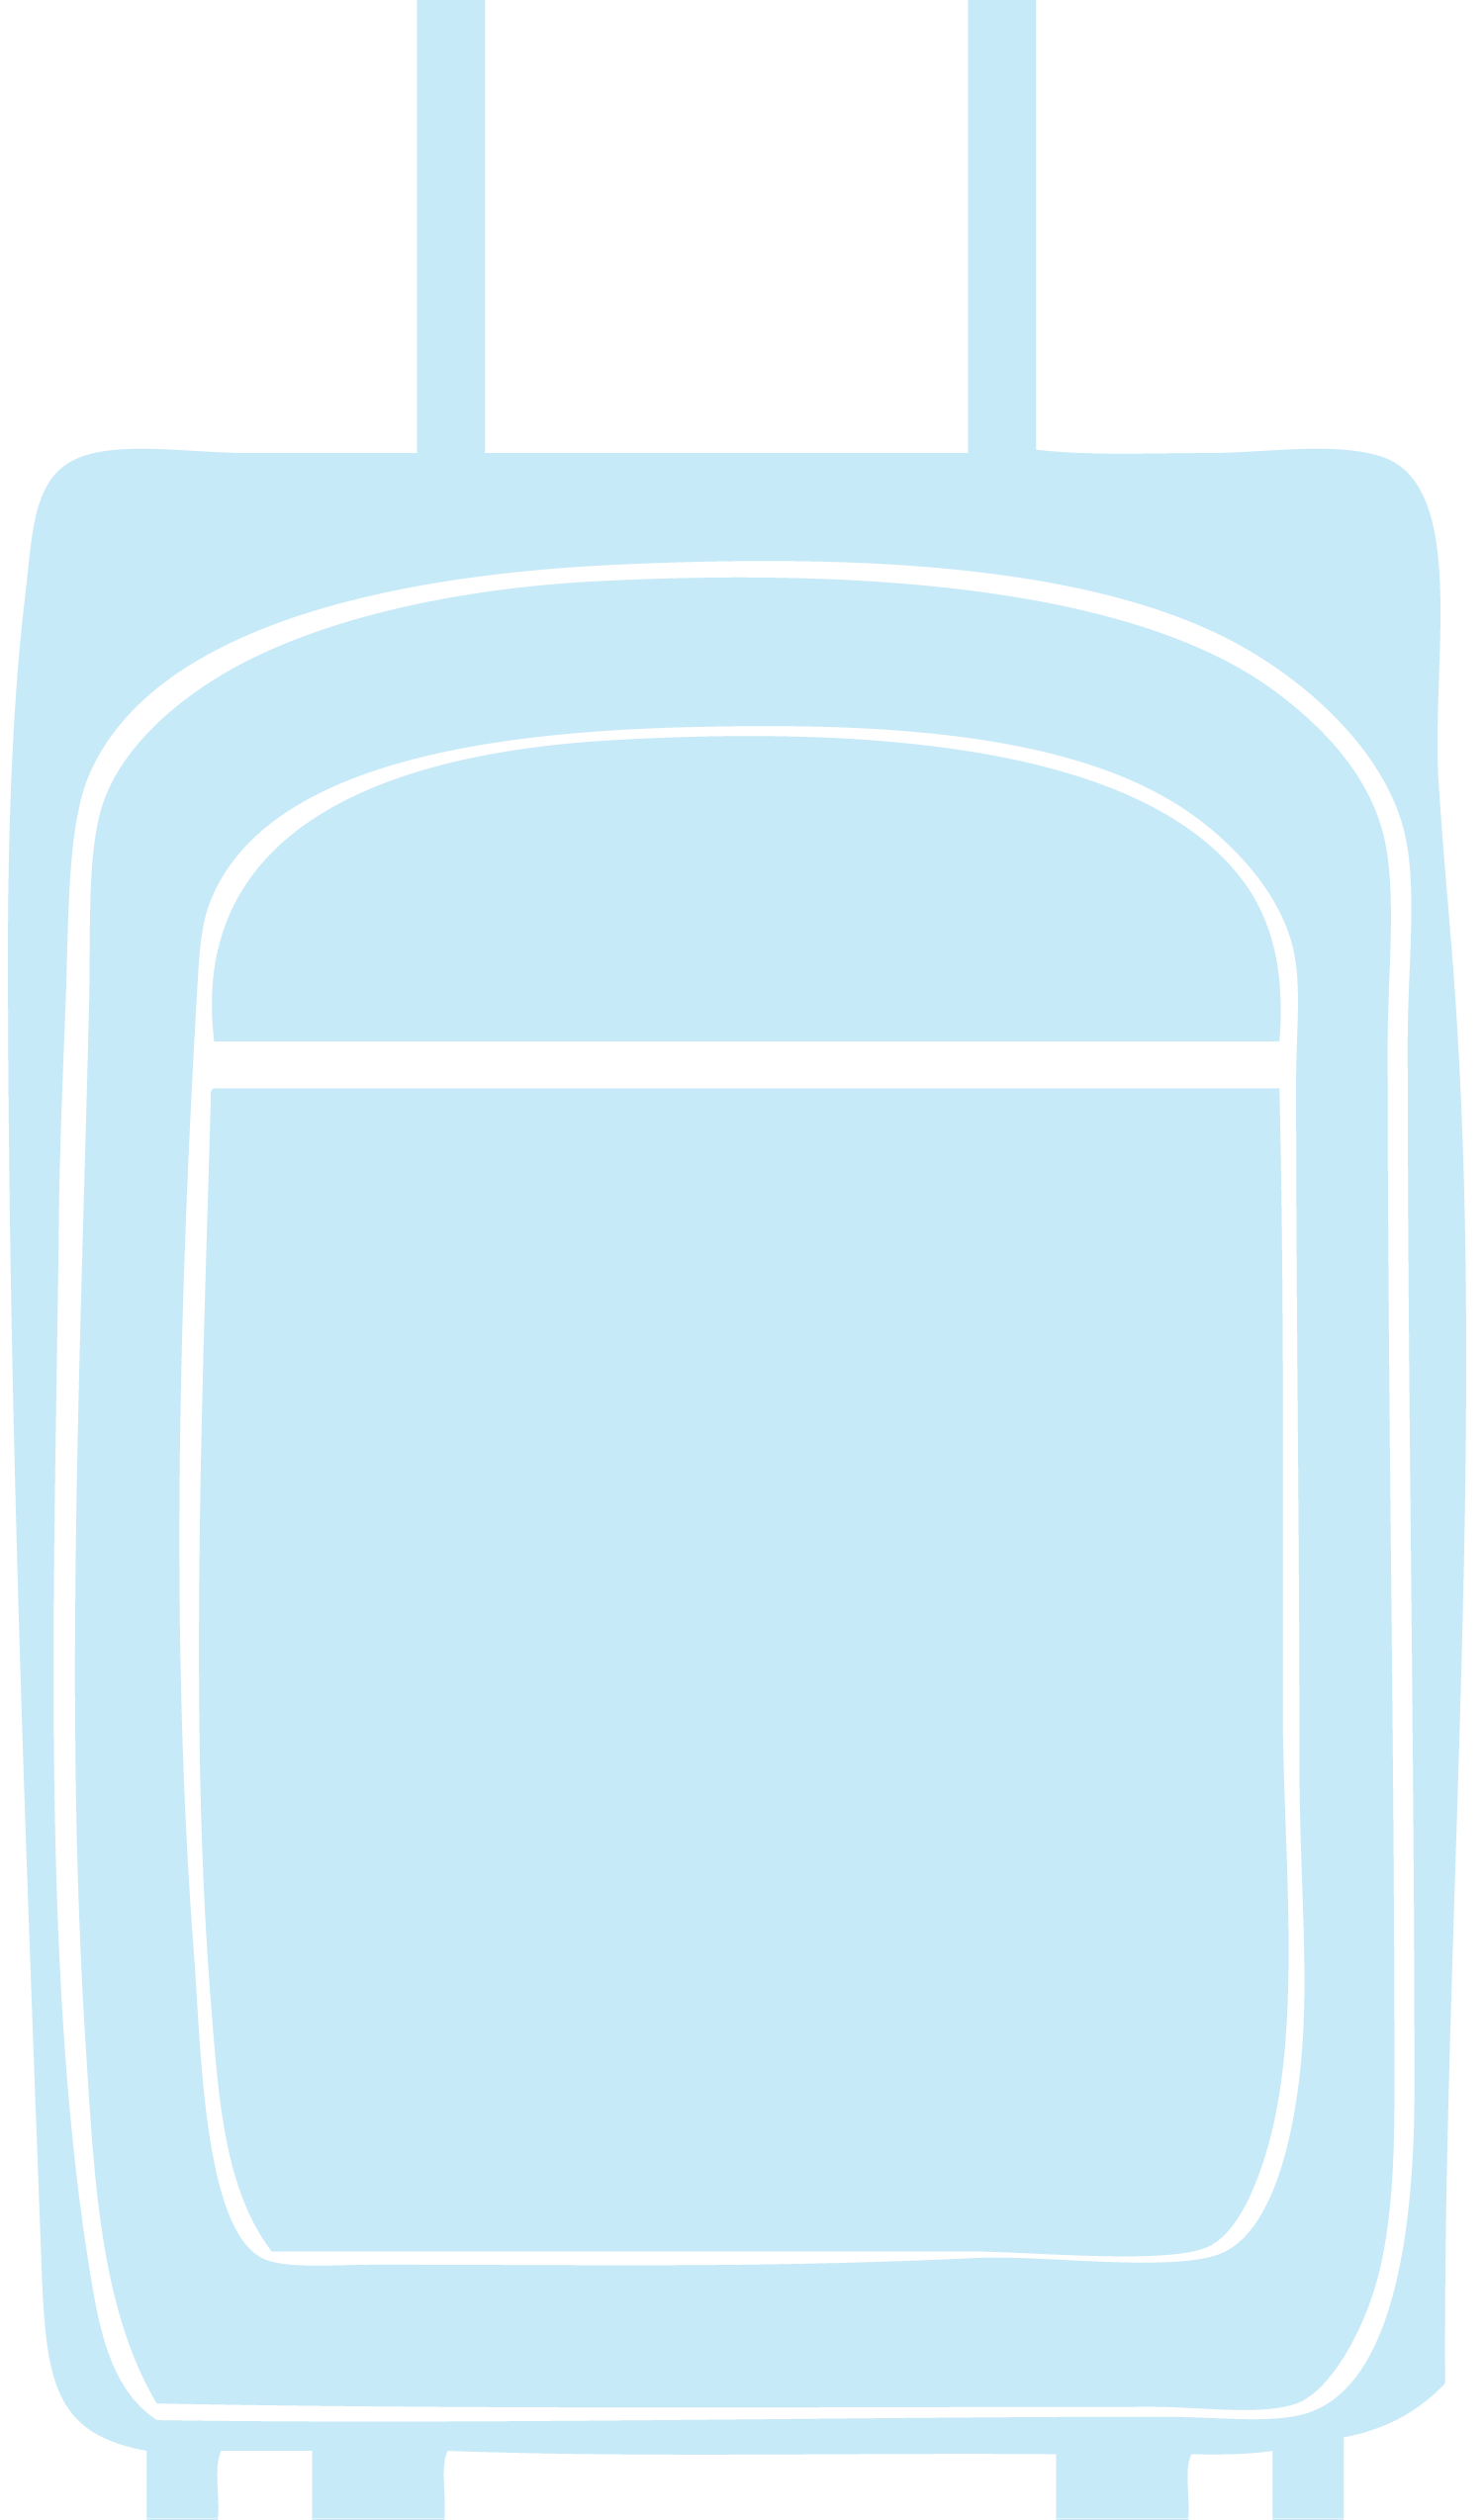 Illustration of carry on luggage